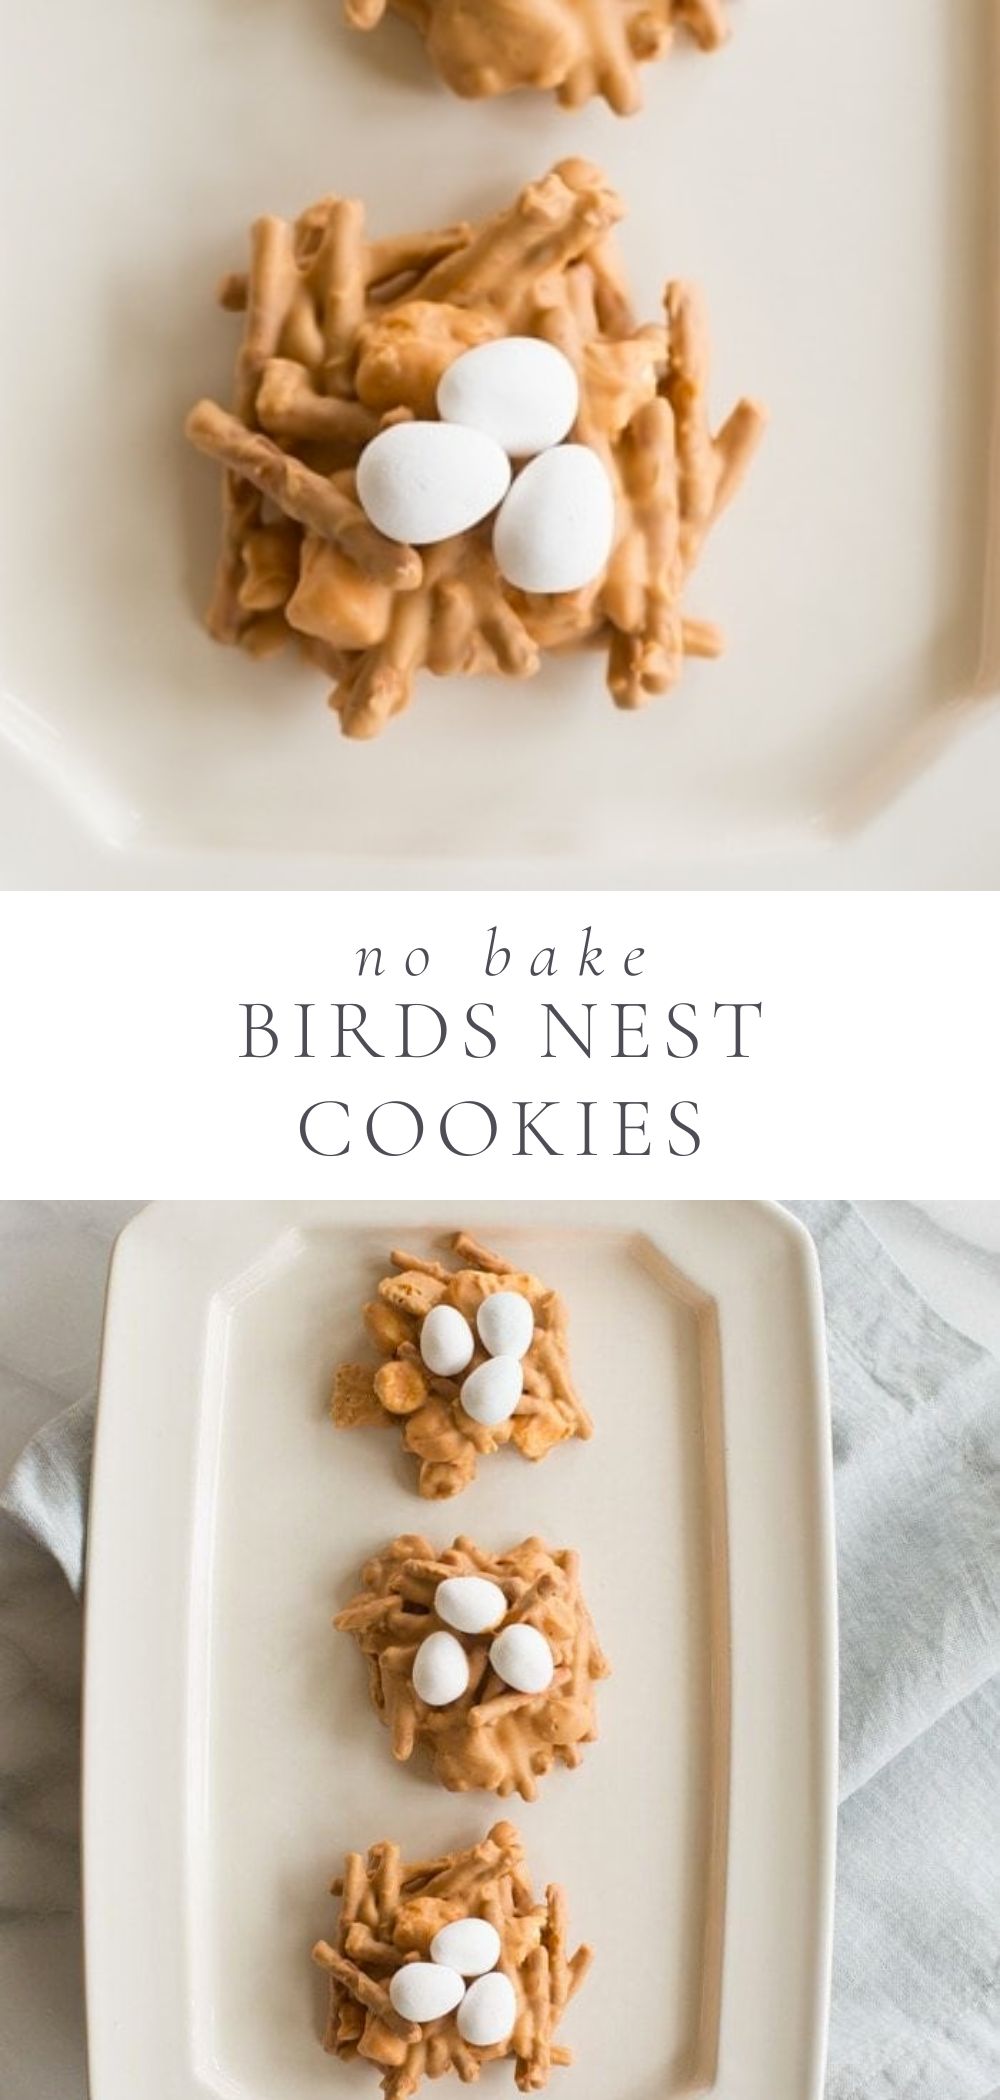 no bake birds next cookies are displayed on a white platter